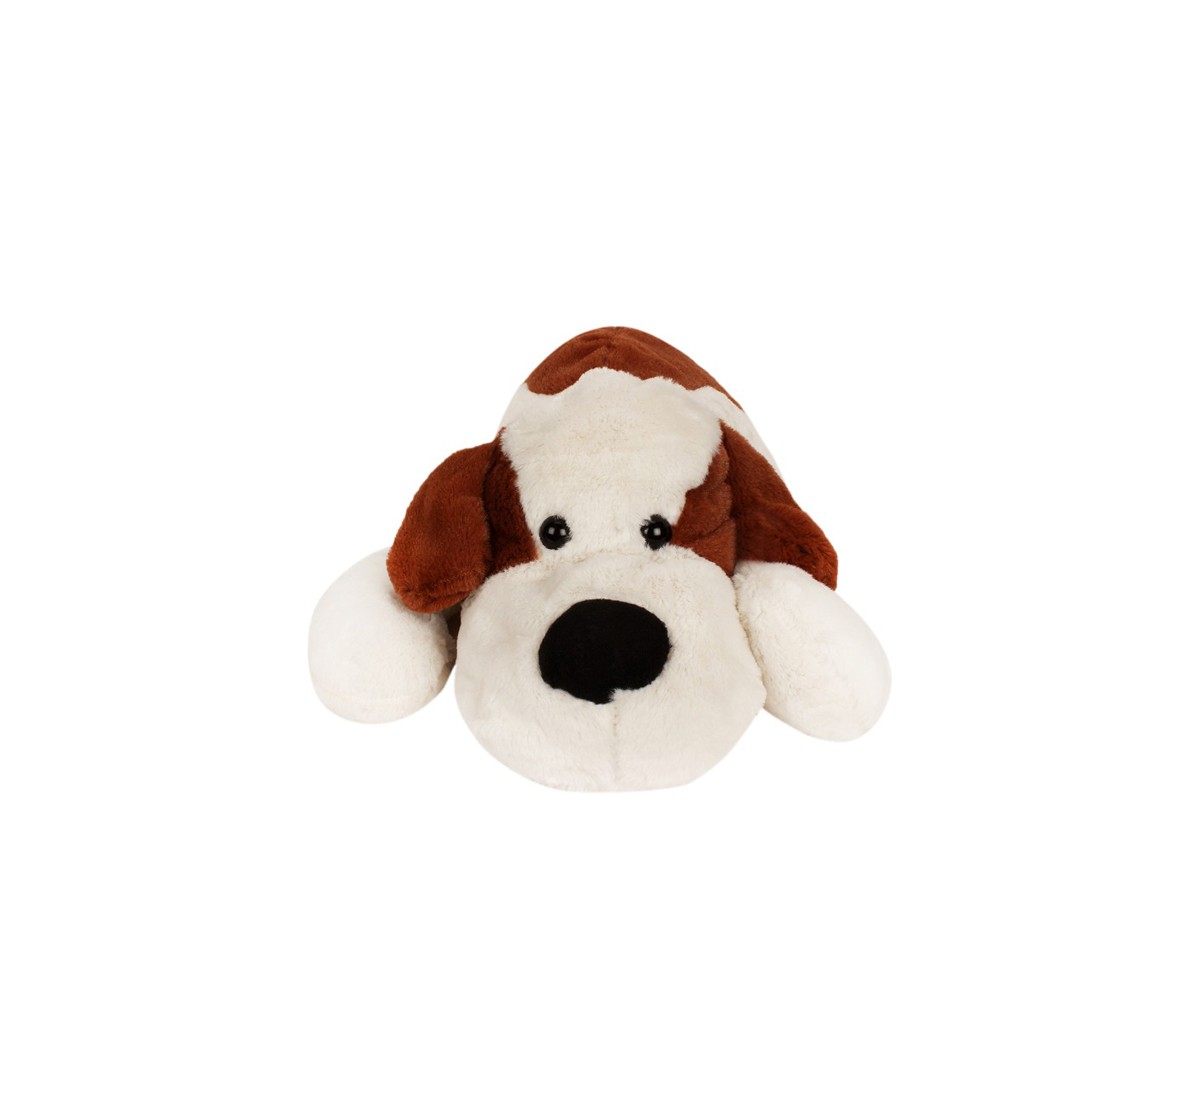 Qingdao Cuddles Laying Dog White And Brown Quirky Soft Toys for Kids age 12M+ - 20 Cm 